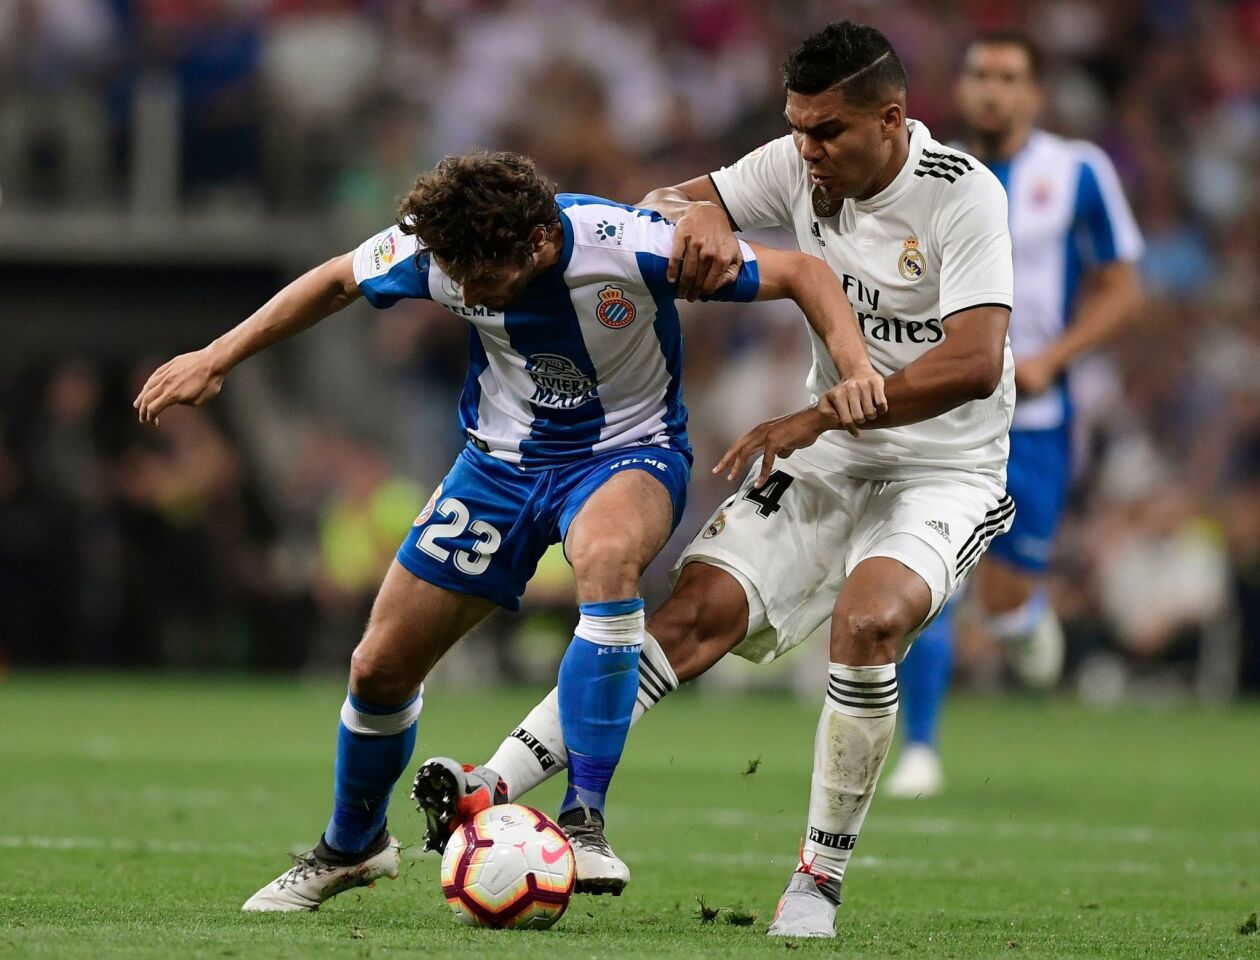 Espanyol's Spanish midfielder Esteban Granero (L) vies with Real Madrid's Brazilian midfielder Casemiro during the Spanish league football match between Real Madrid CF and RCD Espanyol at the Santiago Bernabeu stadium in Madrid on September 22, 2018. (Photo by JAVIER SORIANO / AFP)JAVIER SORIANO/AFP/Getty Images ** OUTS - ELSENT, FPG, CM - OUTS * NM, PH, VA if sourced by CT, LA or MoD **